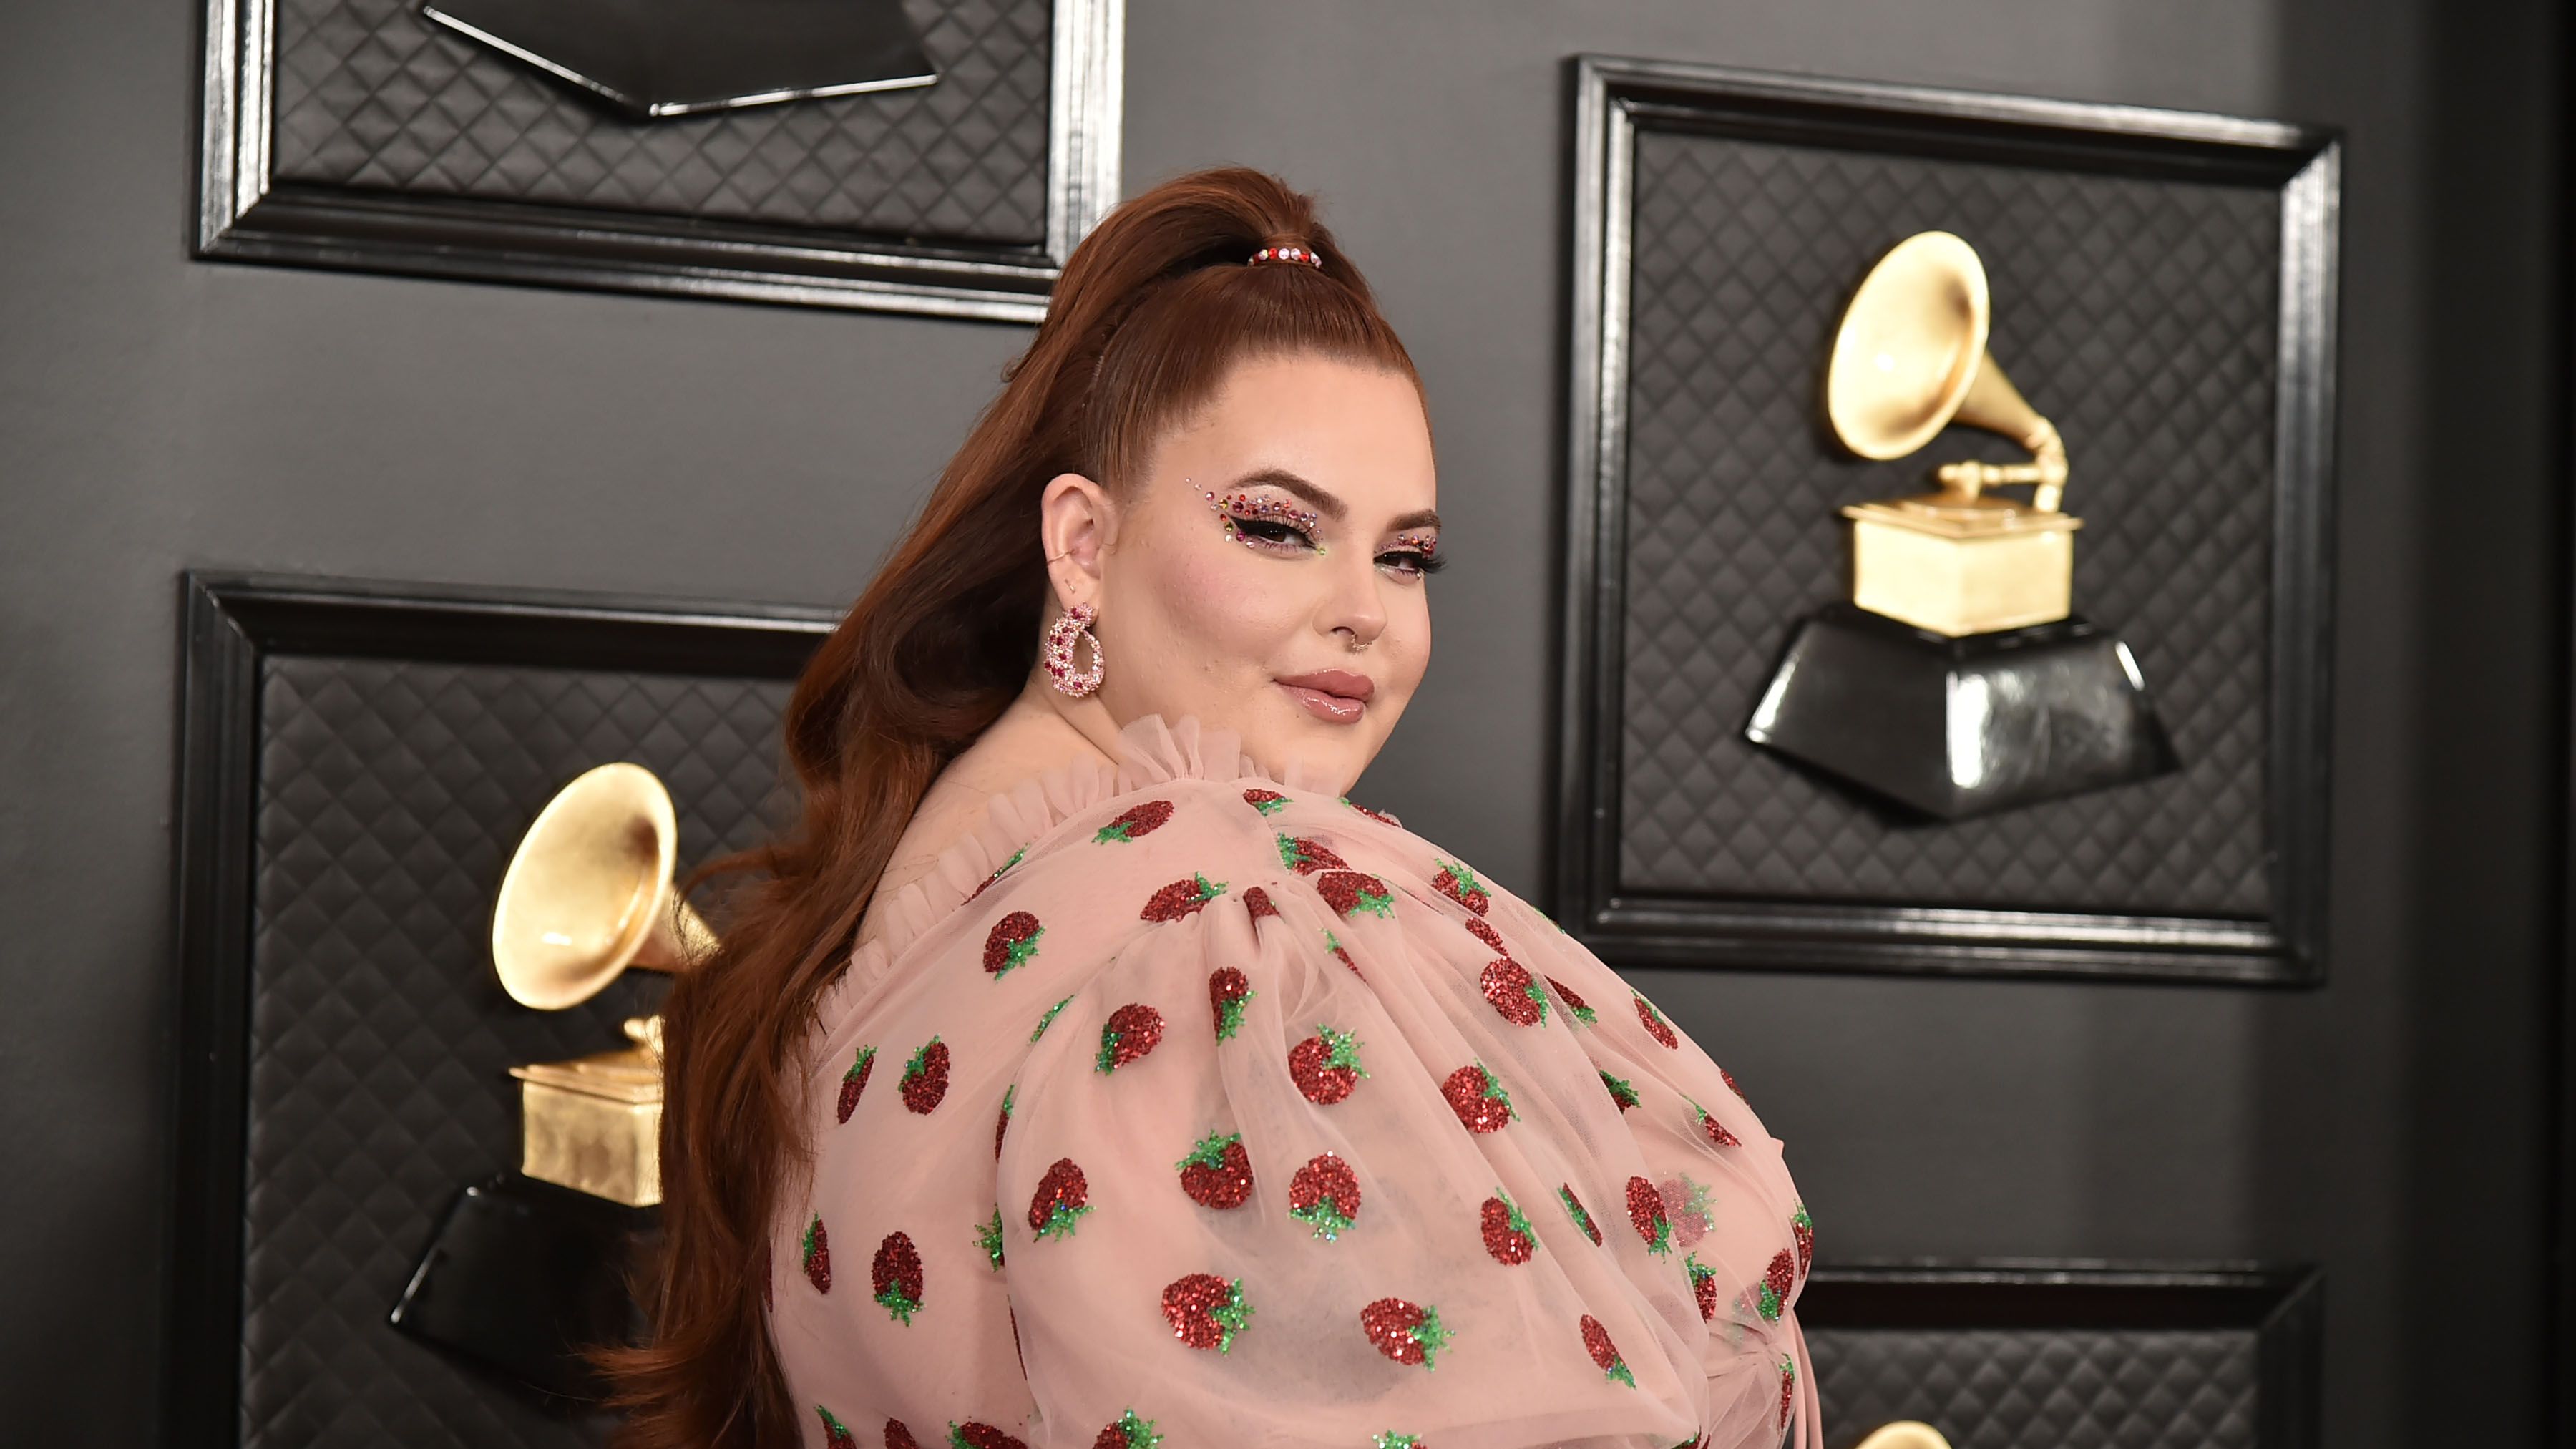 Tess Holliday Gets 'Overwhelming Hate' After Anorexia Diagnosis